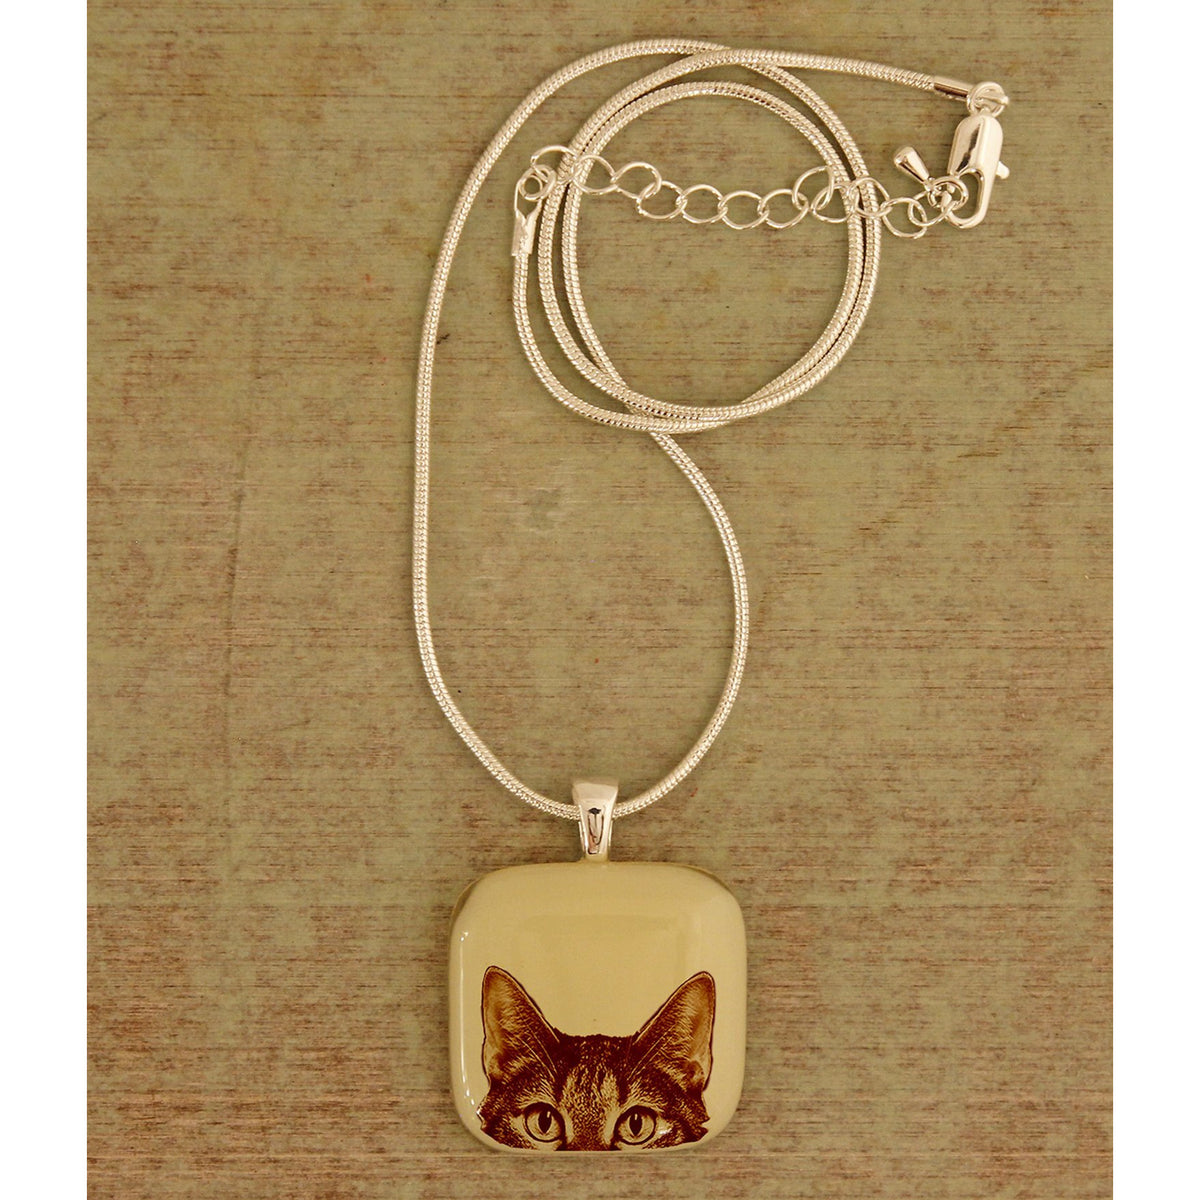 Peaking Kitty Face Pendant Necklace